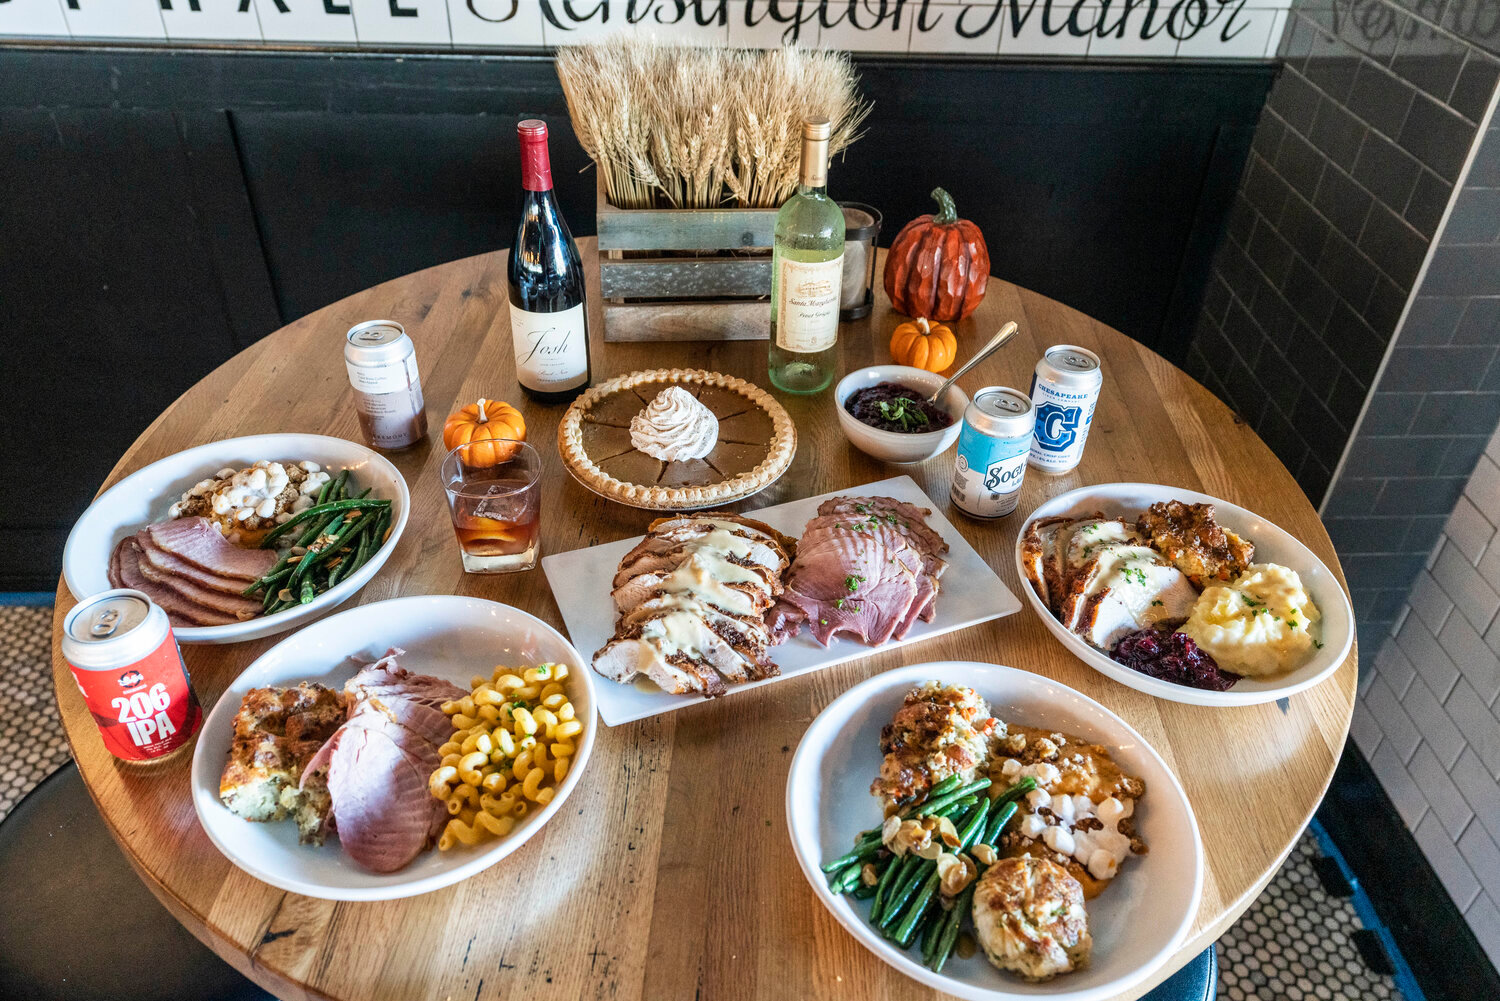 Park Tavern's traditional turkey dinner has white and dark meat, sausage stuffing, mashed potatoes, green beans, sweet potato casserole, turkey gravy and cranberry chutney.